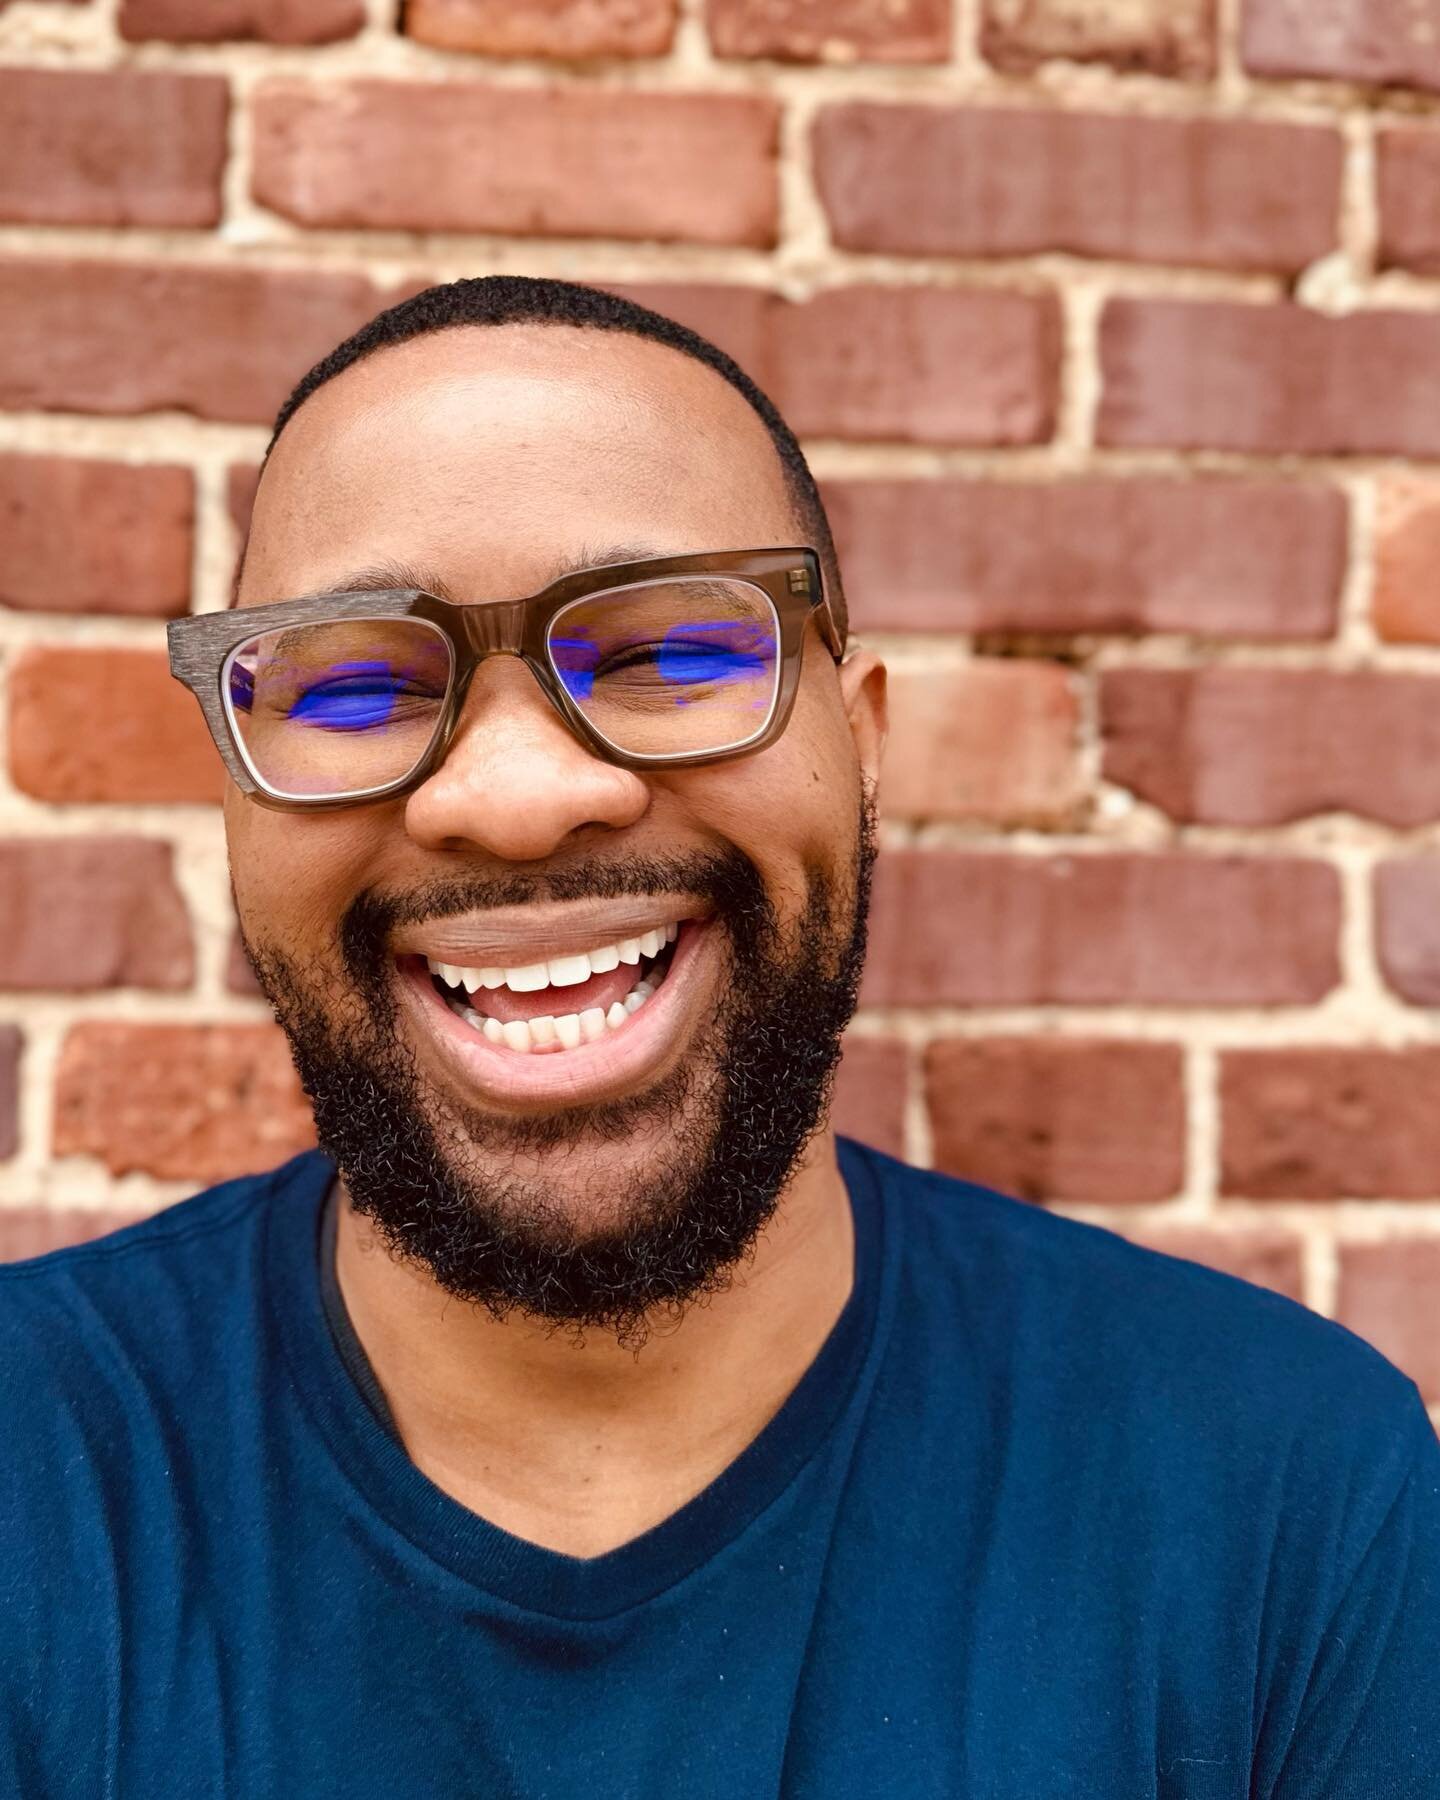 Everyone loves a good candid! 📸
.
That picture perfect smile is paired with a @larad_eyewear , thank you @fusion_eyewear for helping us put smiles like this on our patients! 
.
.
.
#DesignerEyewear #LaraD #SodaCity #UniqueGlasses #UniqueOpticalExper